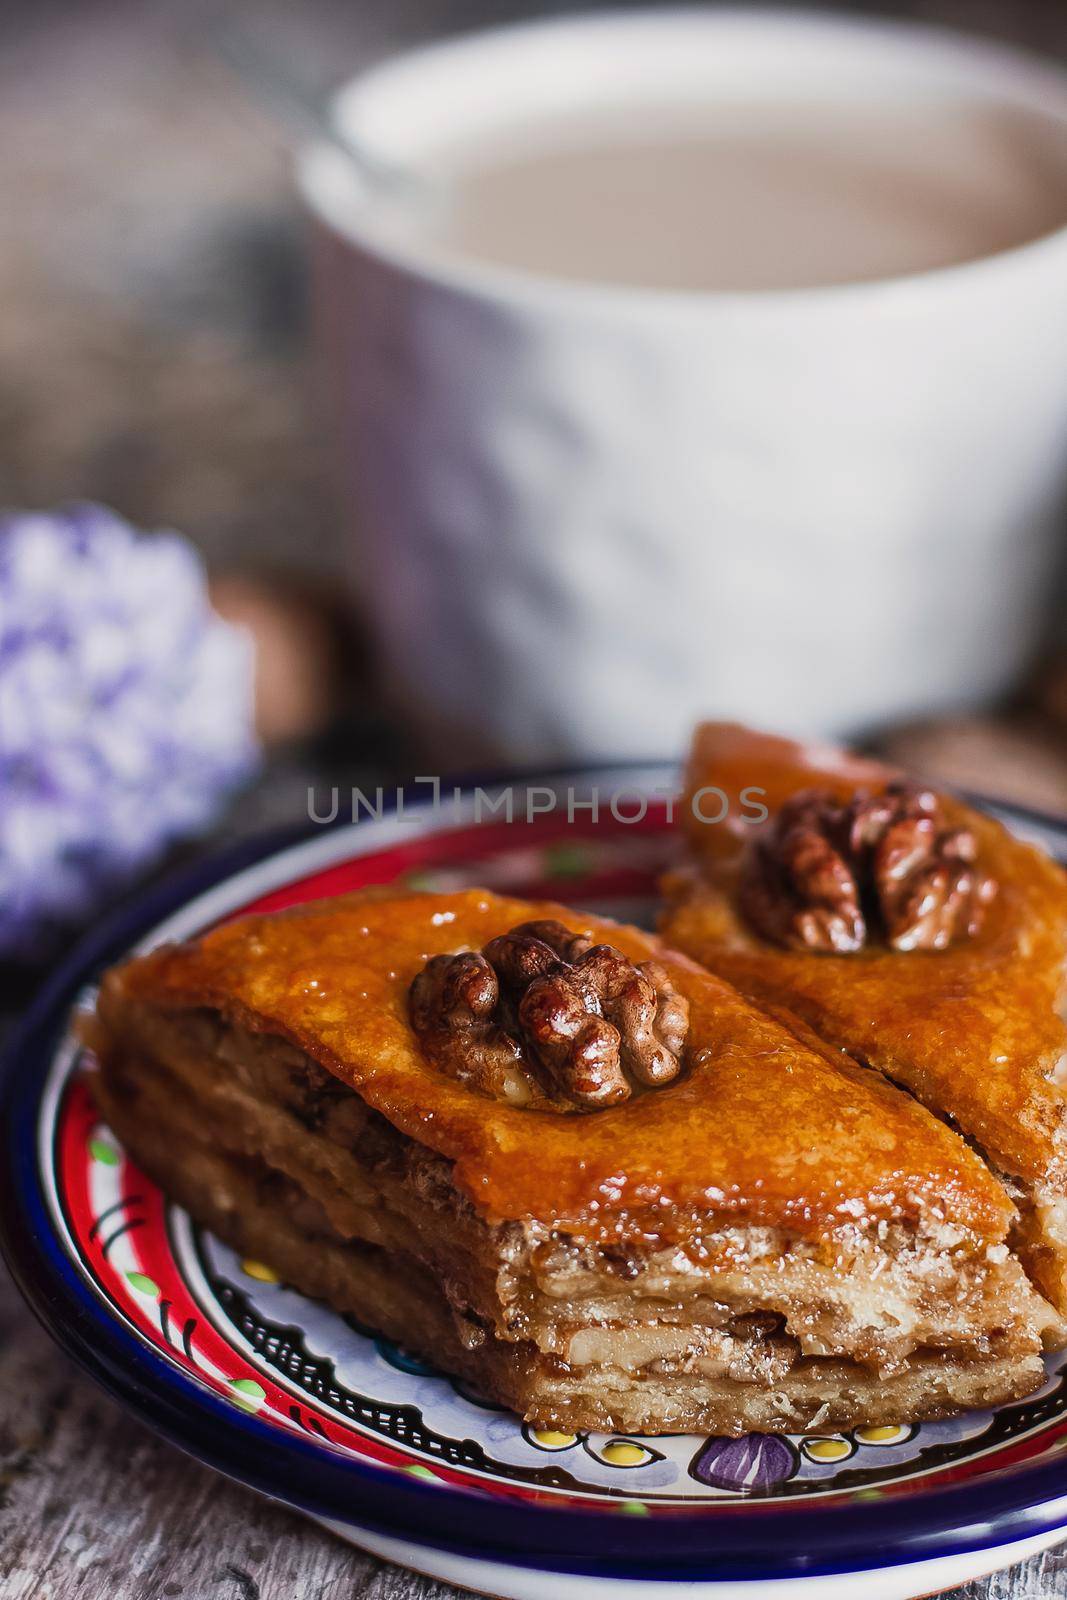 Assorted baklava. A Turkish ramadan arabic sweet dessert on a decorative plate, with coffee cup in the background. Middle eastern food baklava with nuts and honey syrup.